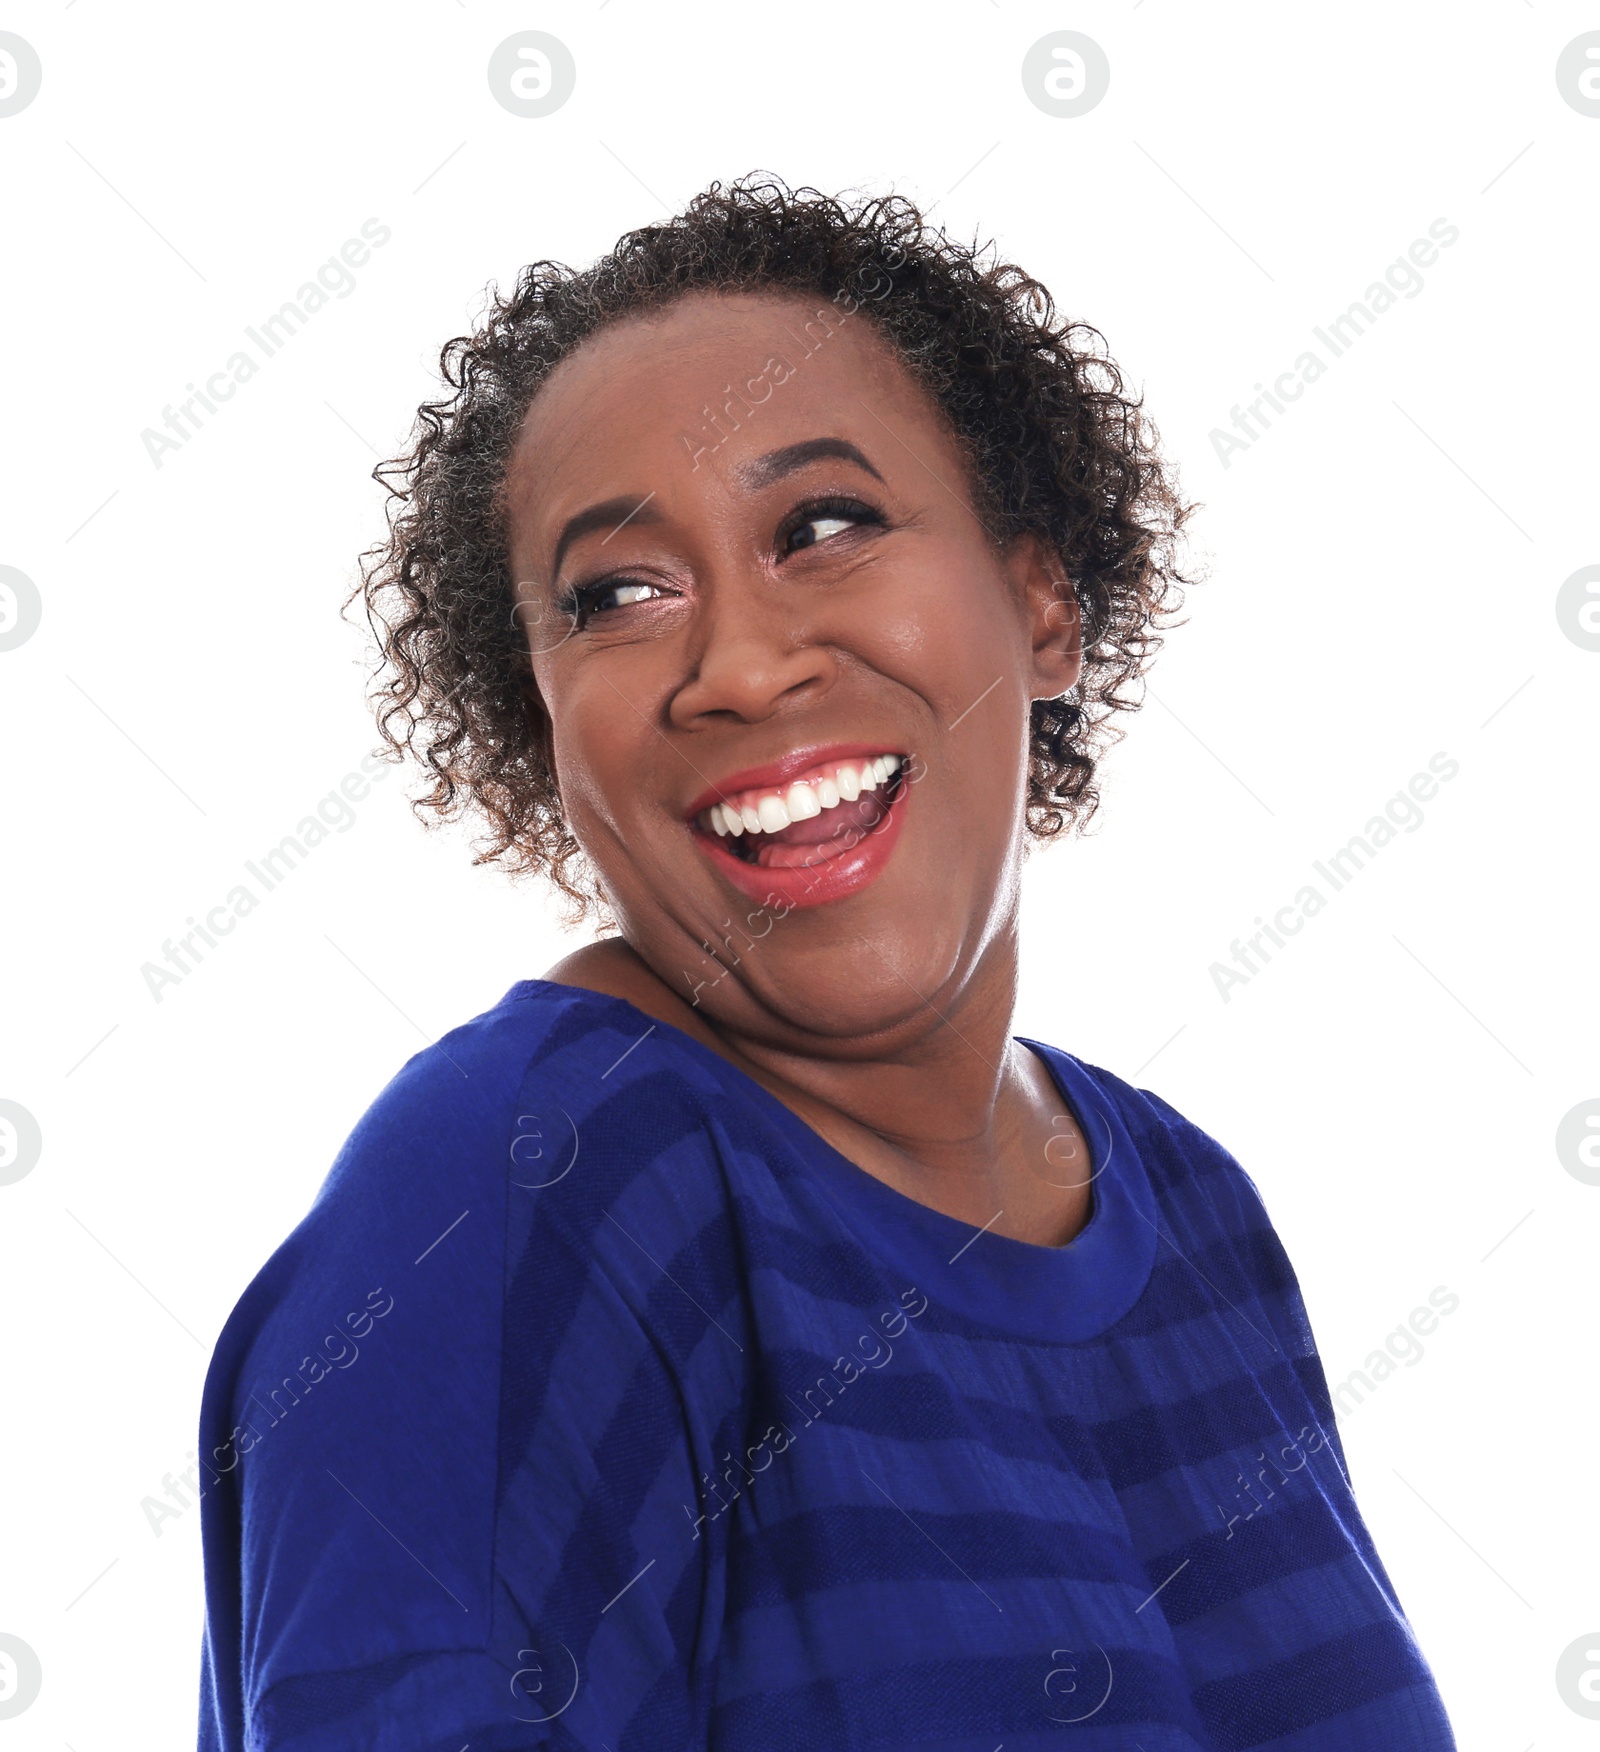 Photo of Portrait of happy African-American woman on white background